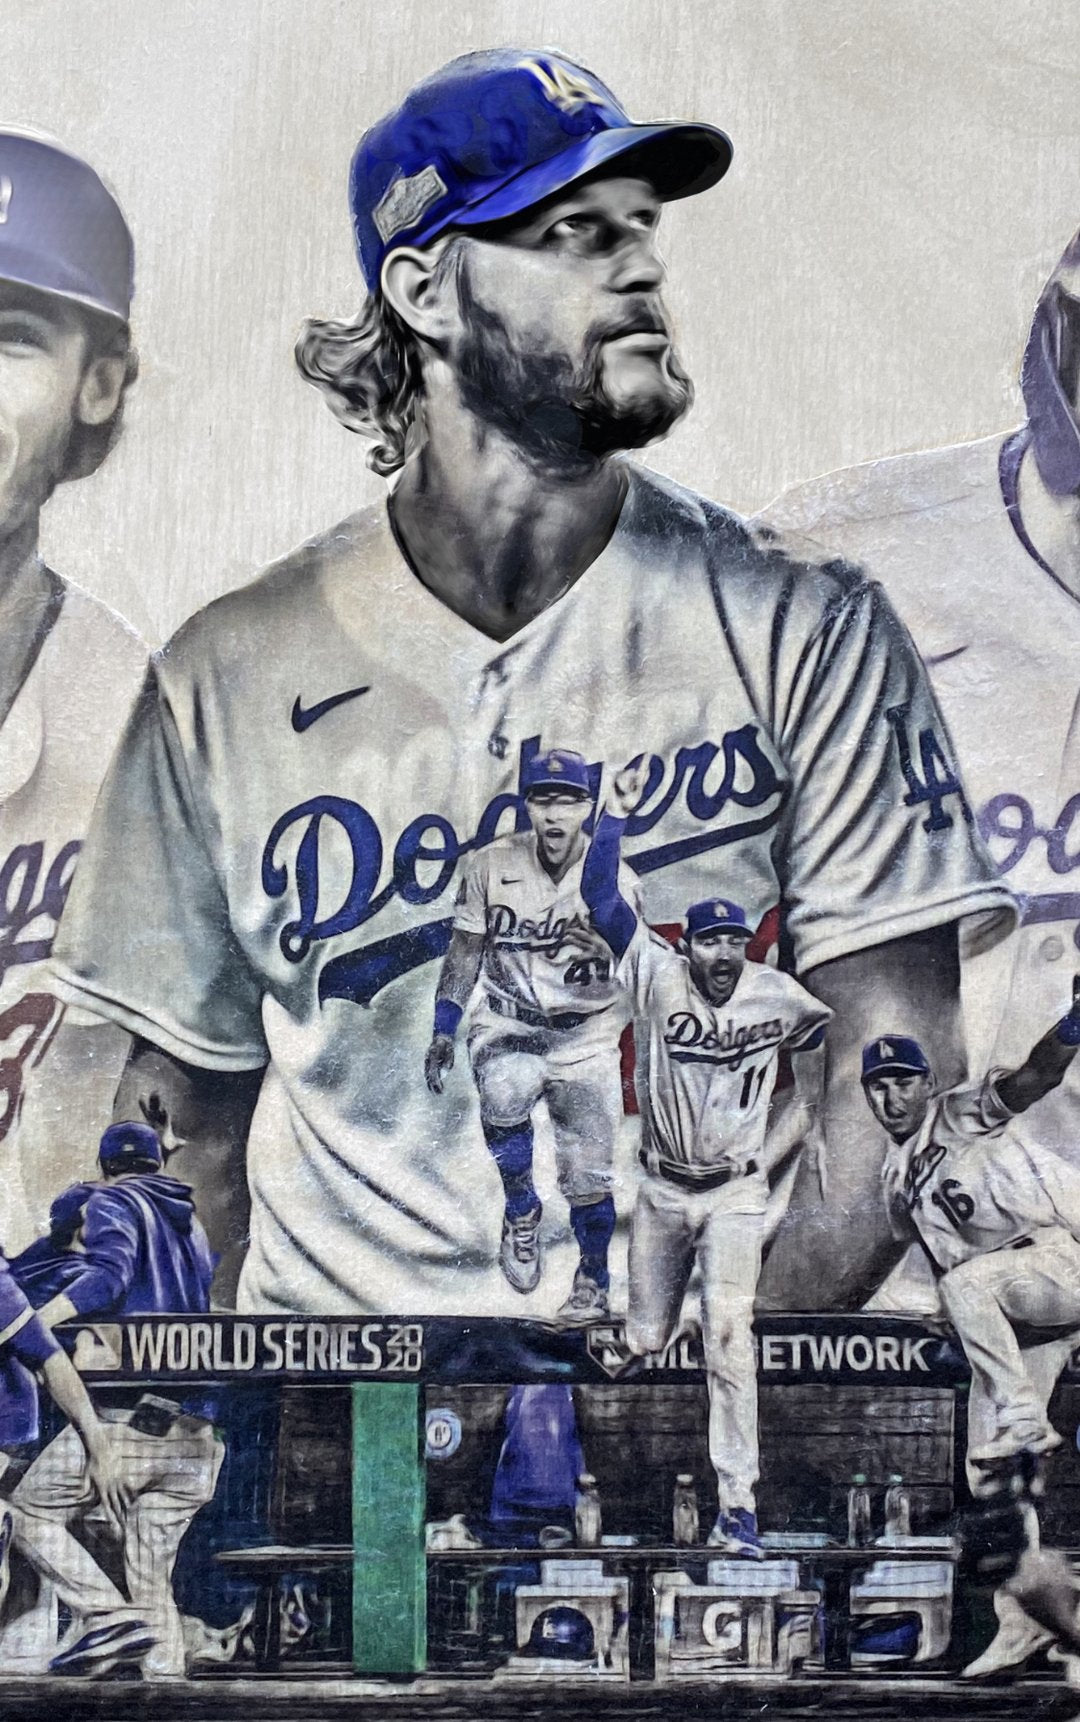 "Seven" (Los Angeles Dodgers) 2020 World Series Champions - Officially Licensed MLB Print - Commemorative PURPLE SIGNATURE Limited Release /250